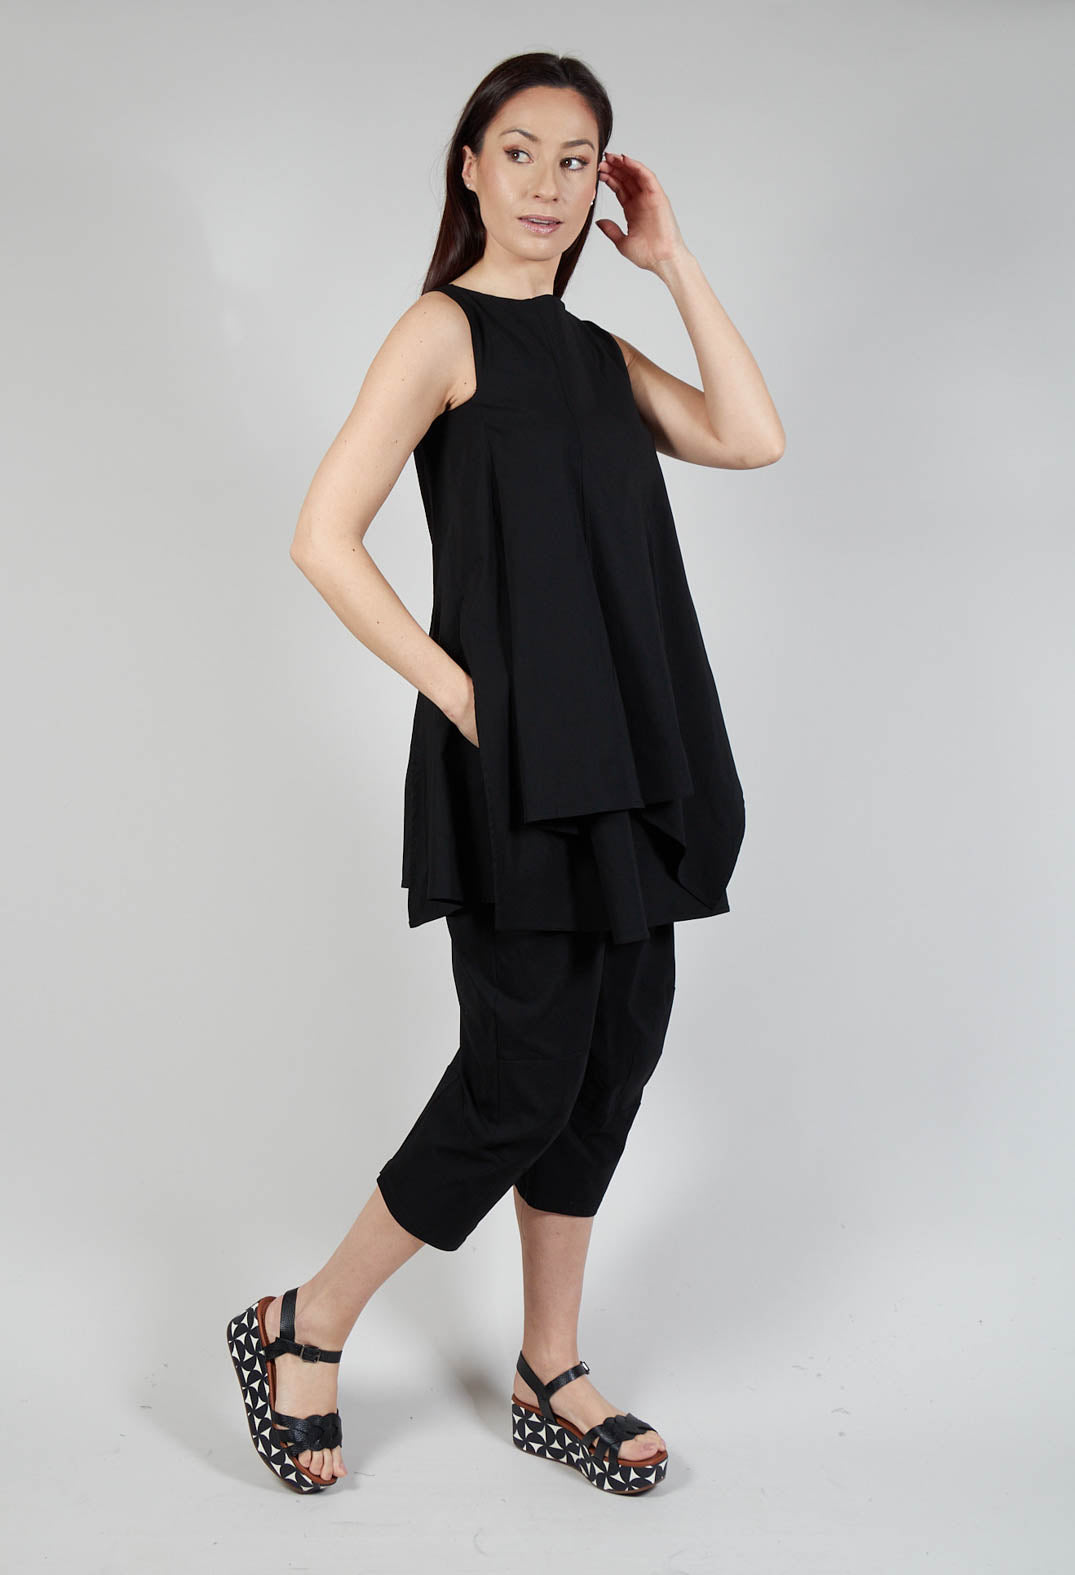 Pulp Fiction Tunic Top in Black